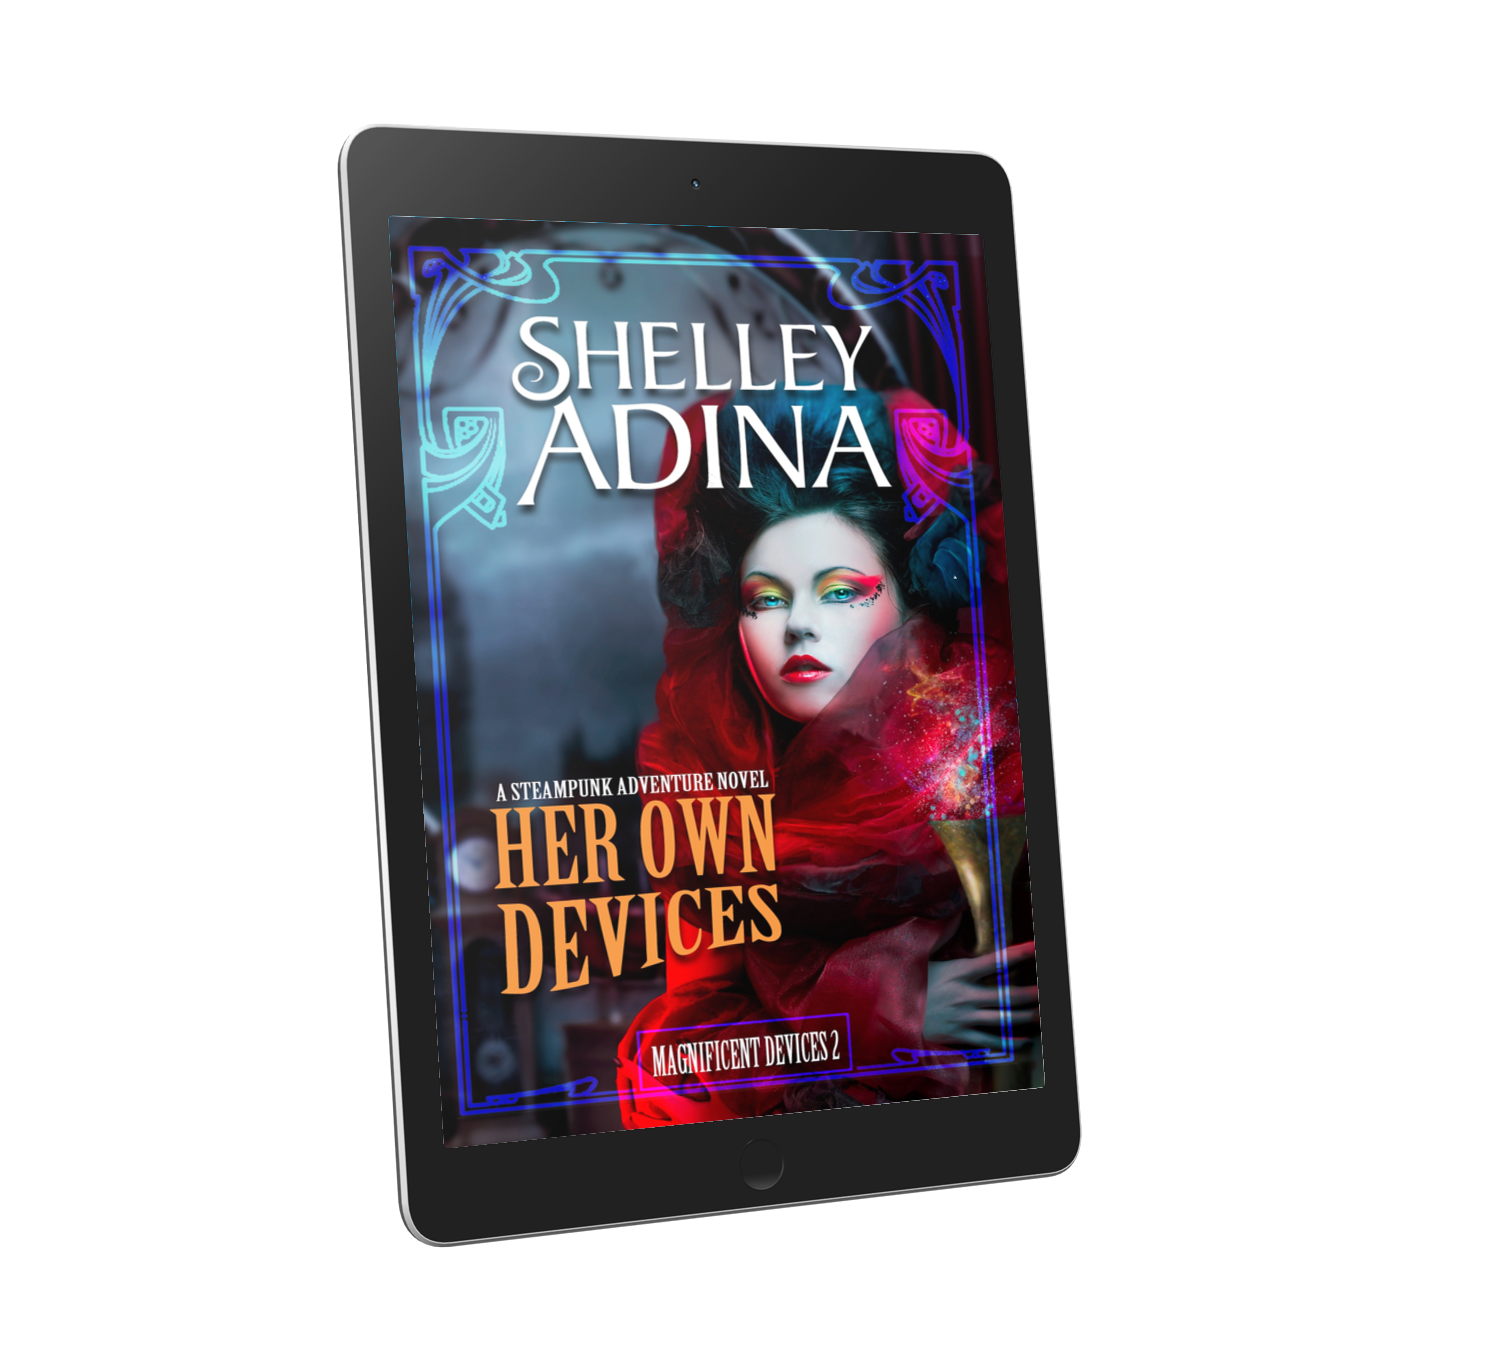 Her Own Devices, a steampunk adventure novel by Shelley Adina